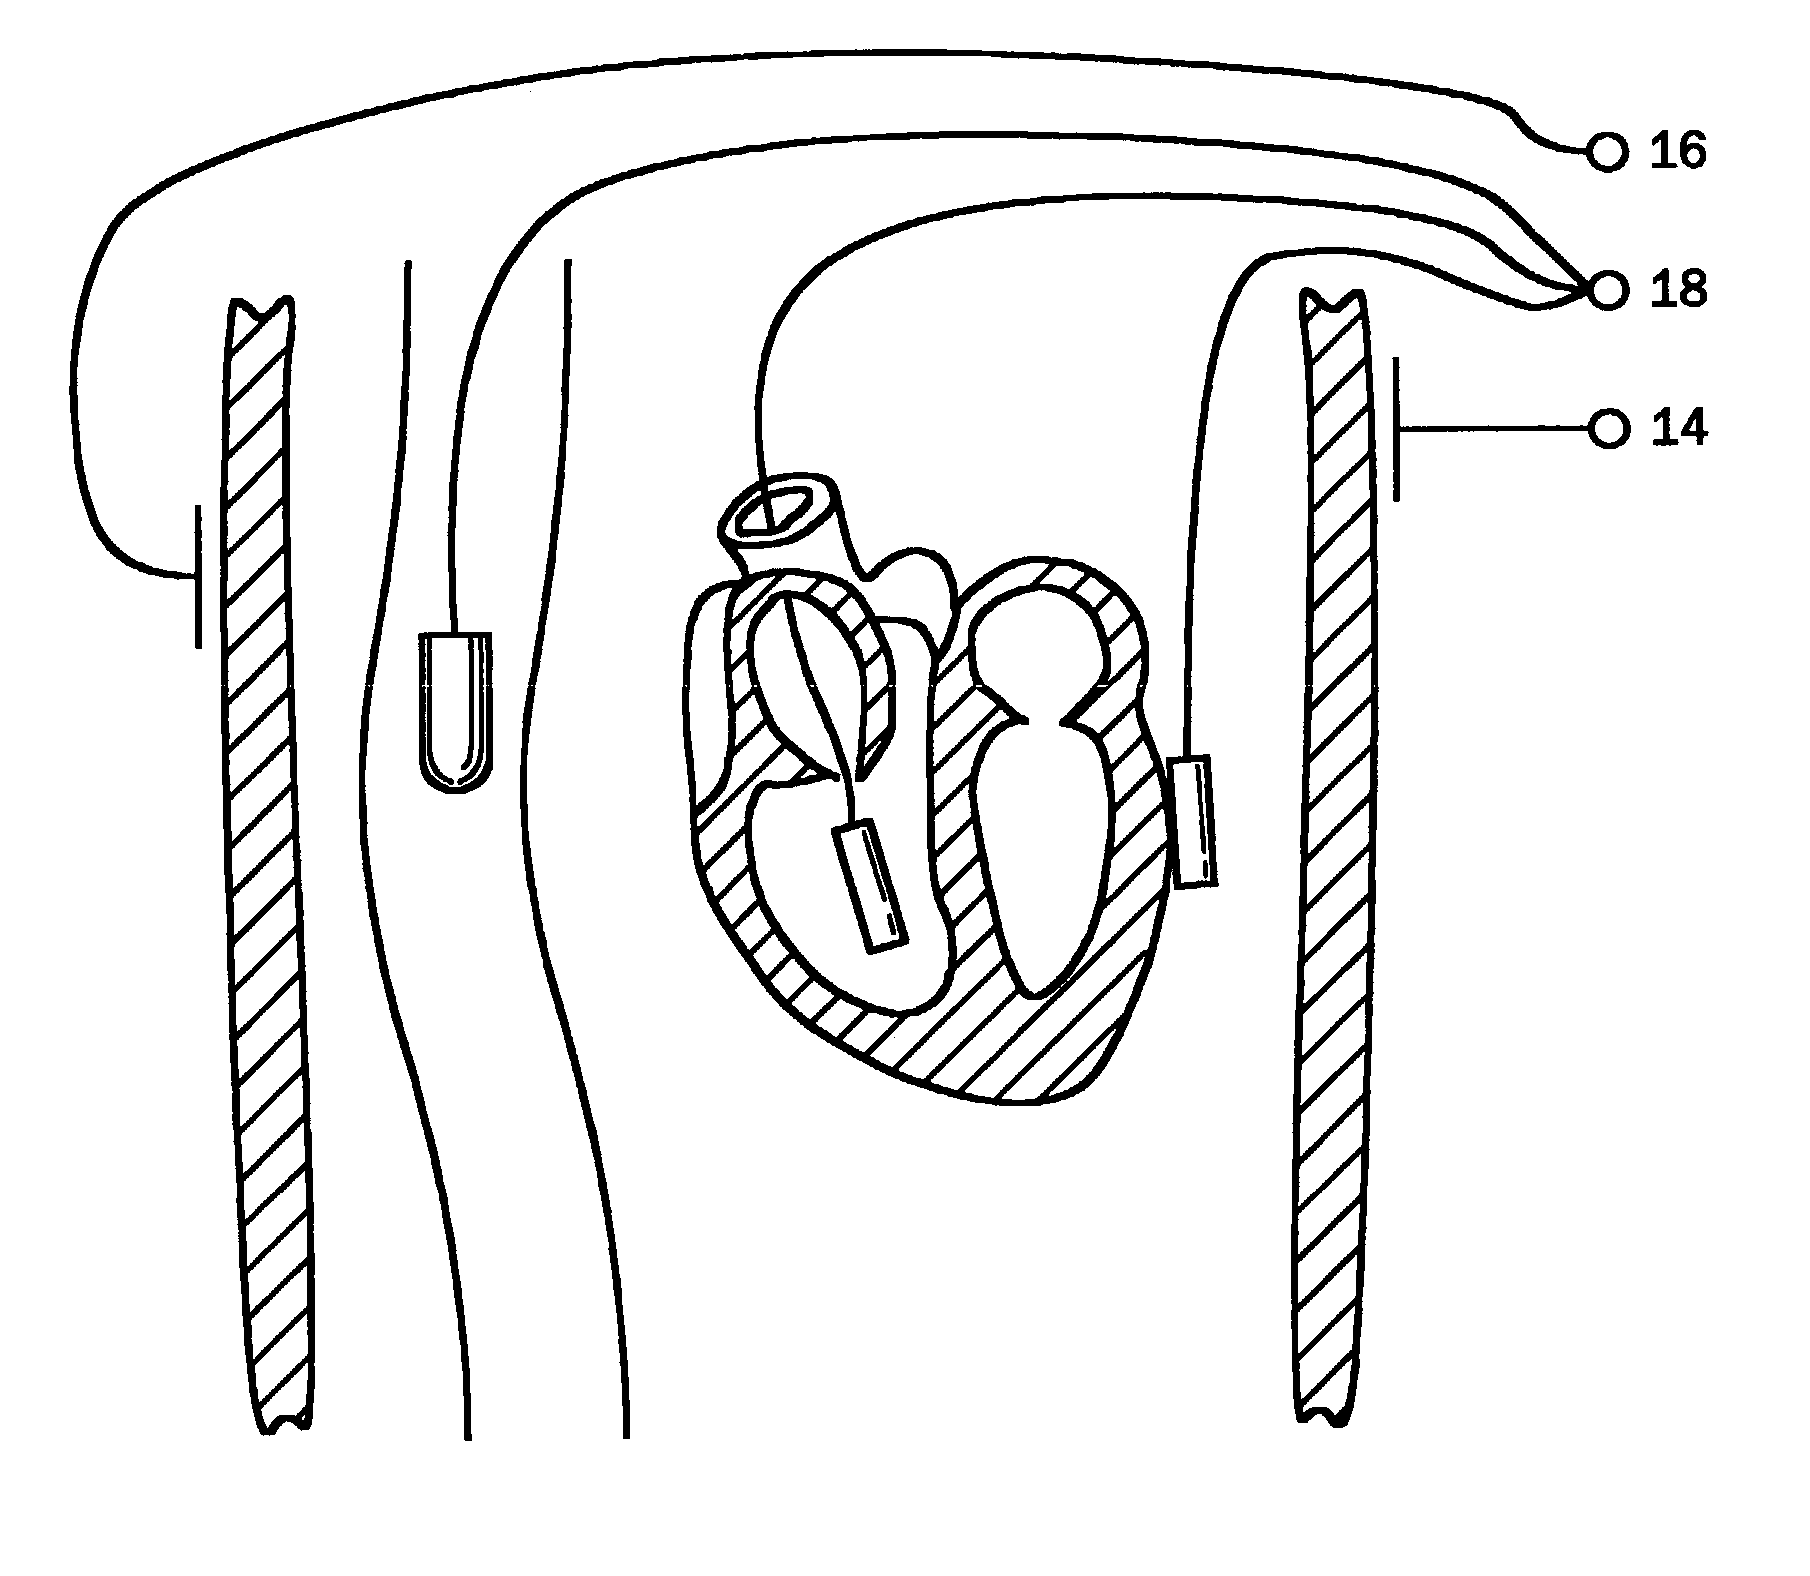 Therapeutic device and method for treating diseases of cardiac muscle